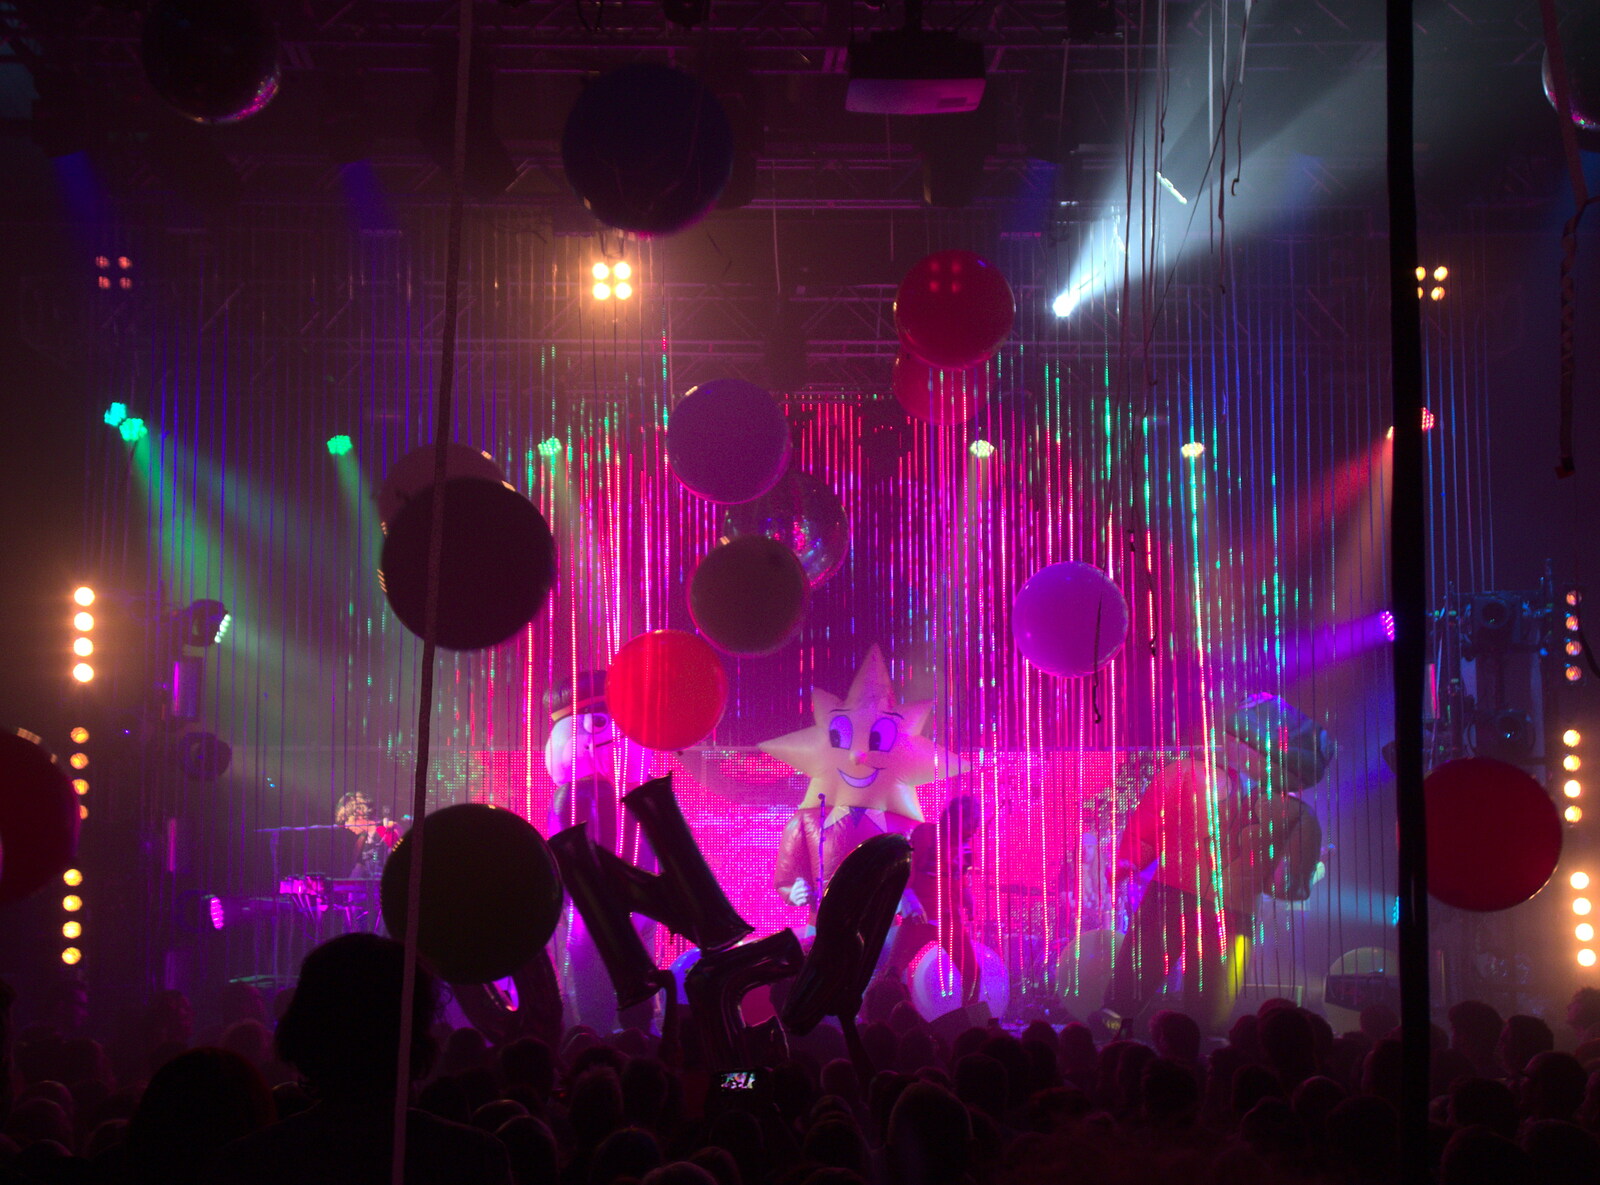 More balloons bounce around from Flaming Lips at the UEA, Norwich, Norfolk - 26th June 2017